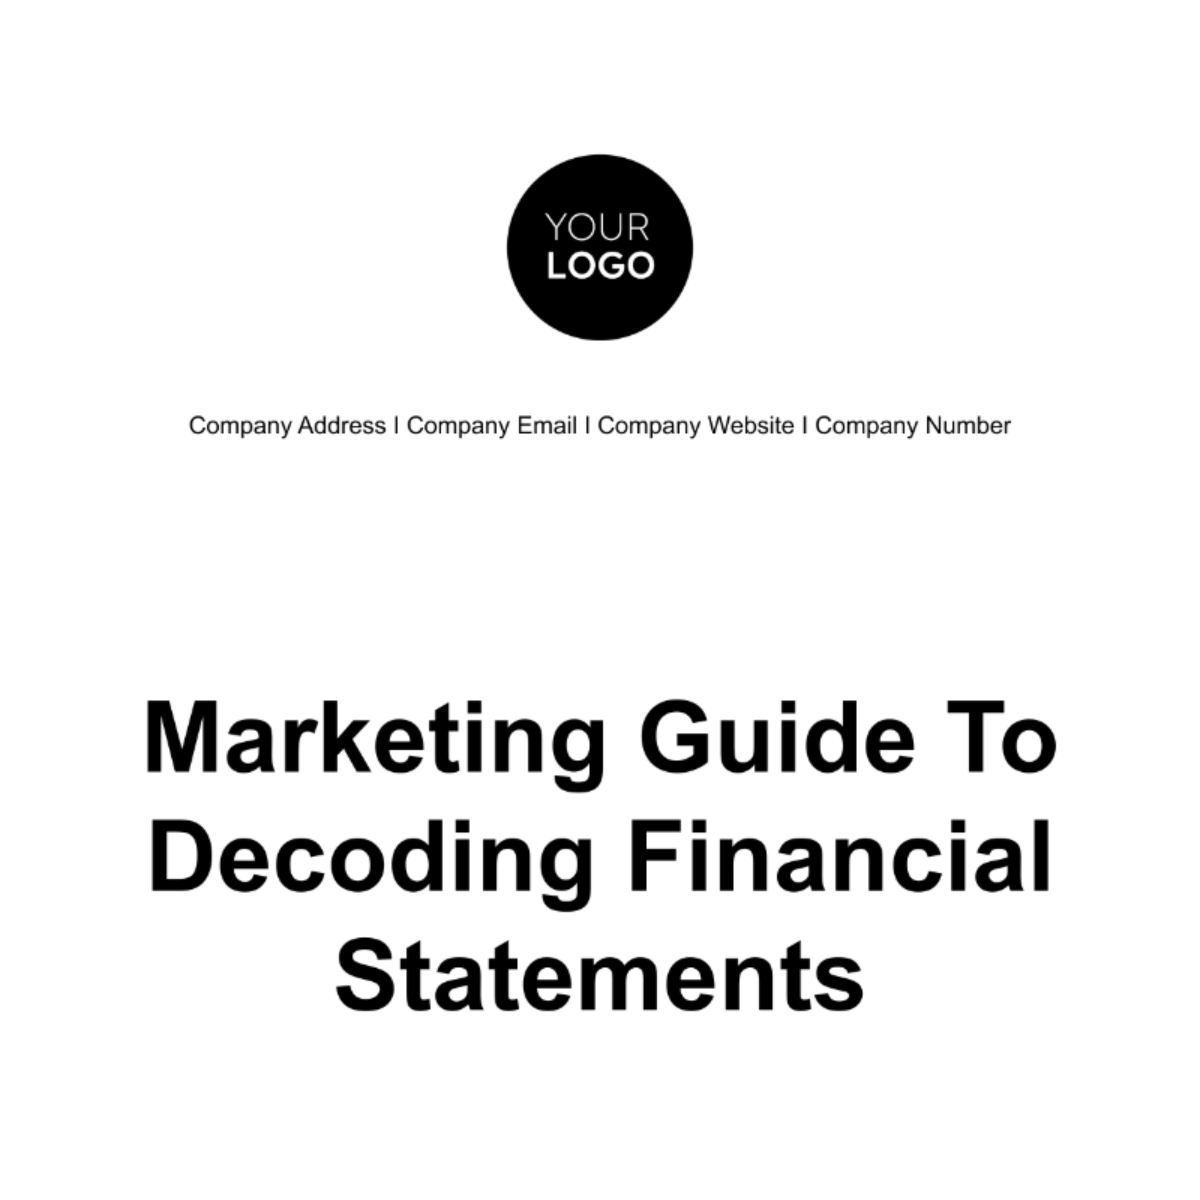 Free Marketing Guide to Decoding Financial Statements Template